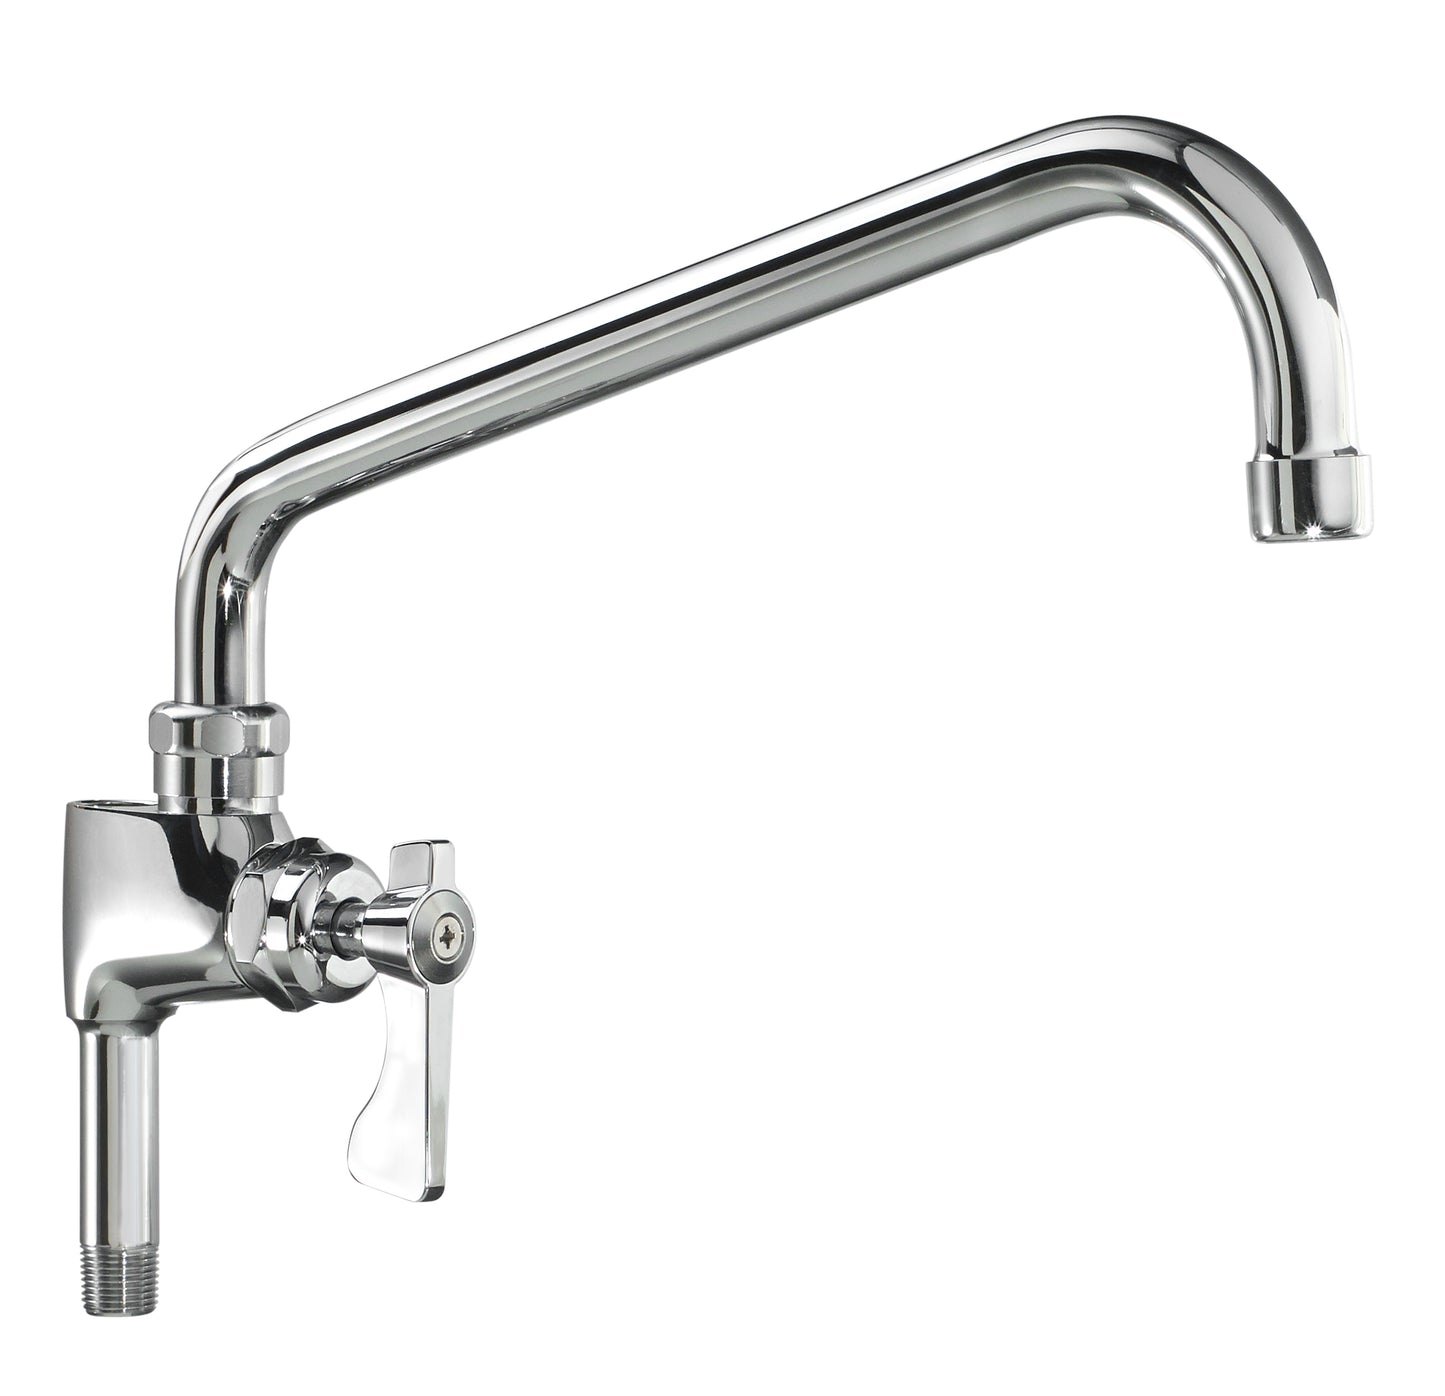 Krowne 21-149L. Royal Series Add-on Faucet with 8" Spout for  Pre-rinse.